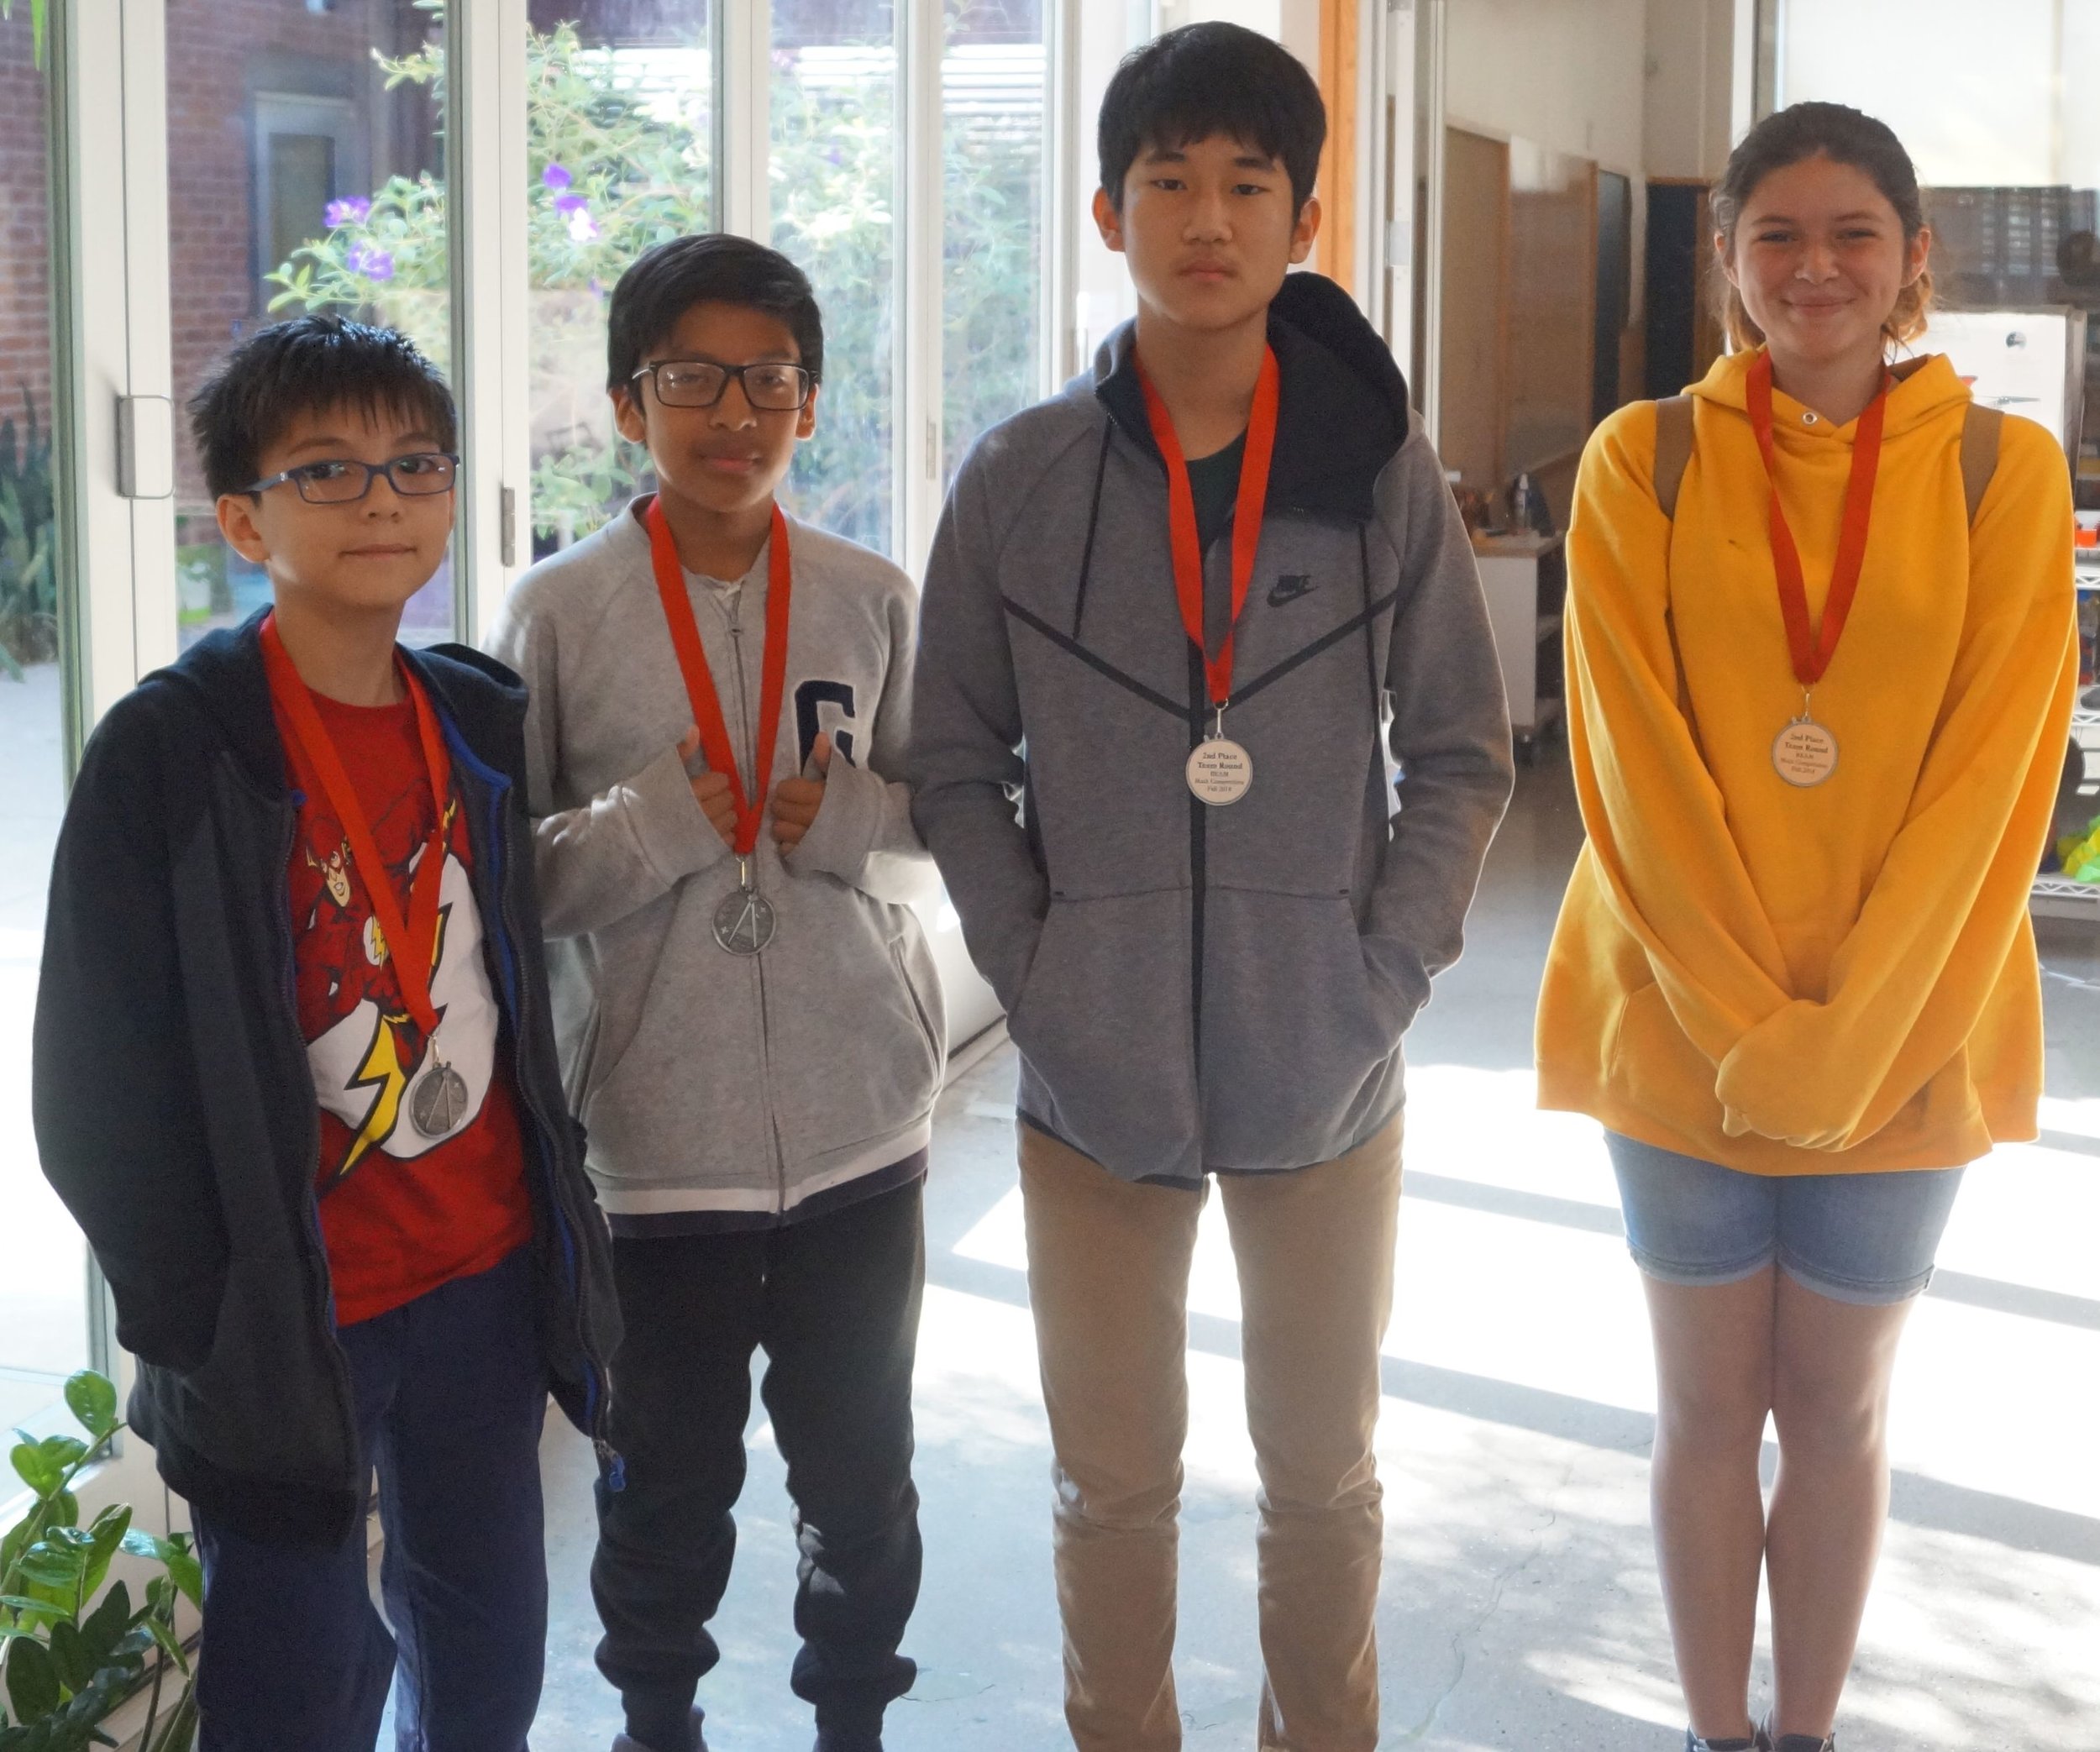  From left to right, Jipper, Abraham, Joshua, and Cherokee, won second place in the team round representing UCLA Community School. Abraham and Cherokee are BEAM alum.  